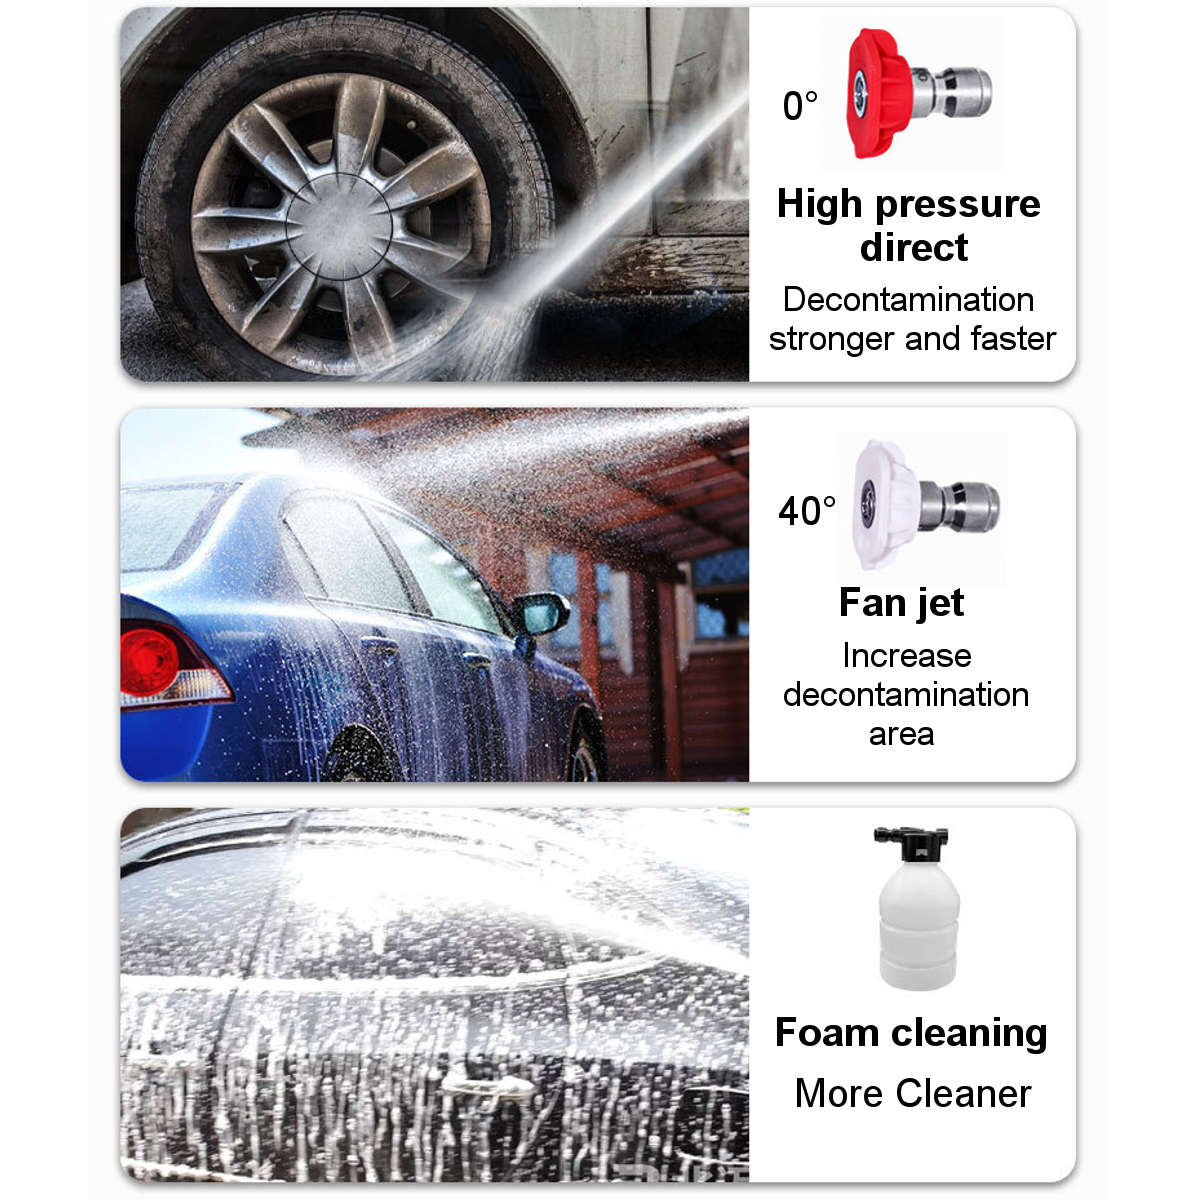 36V-High-Pressure-Washer-Cleaner-Pumps-Electric-Cordless-Car-Washing-Guns-Water-Hose-Cleaning-W-12pc-1845262-8